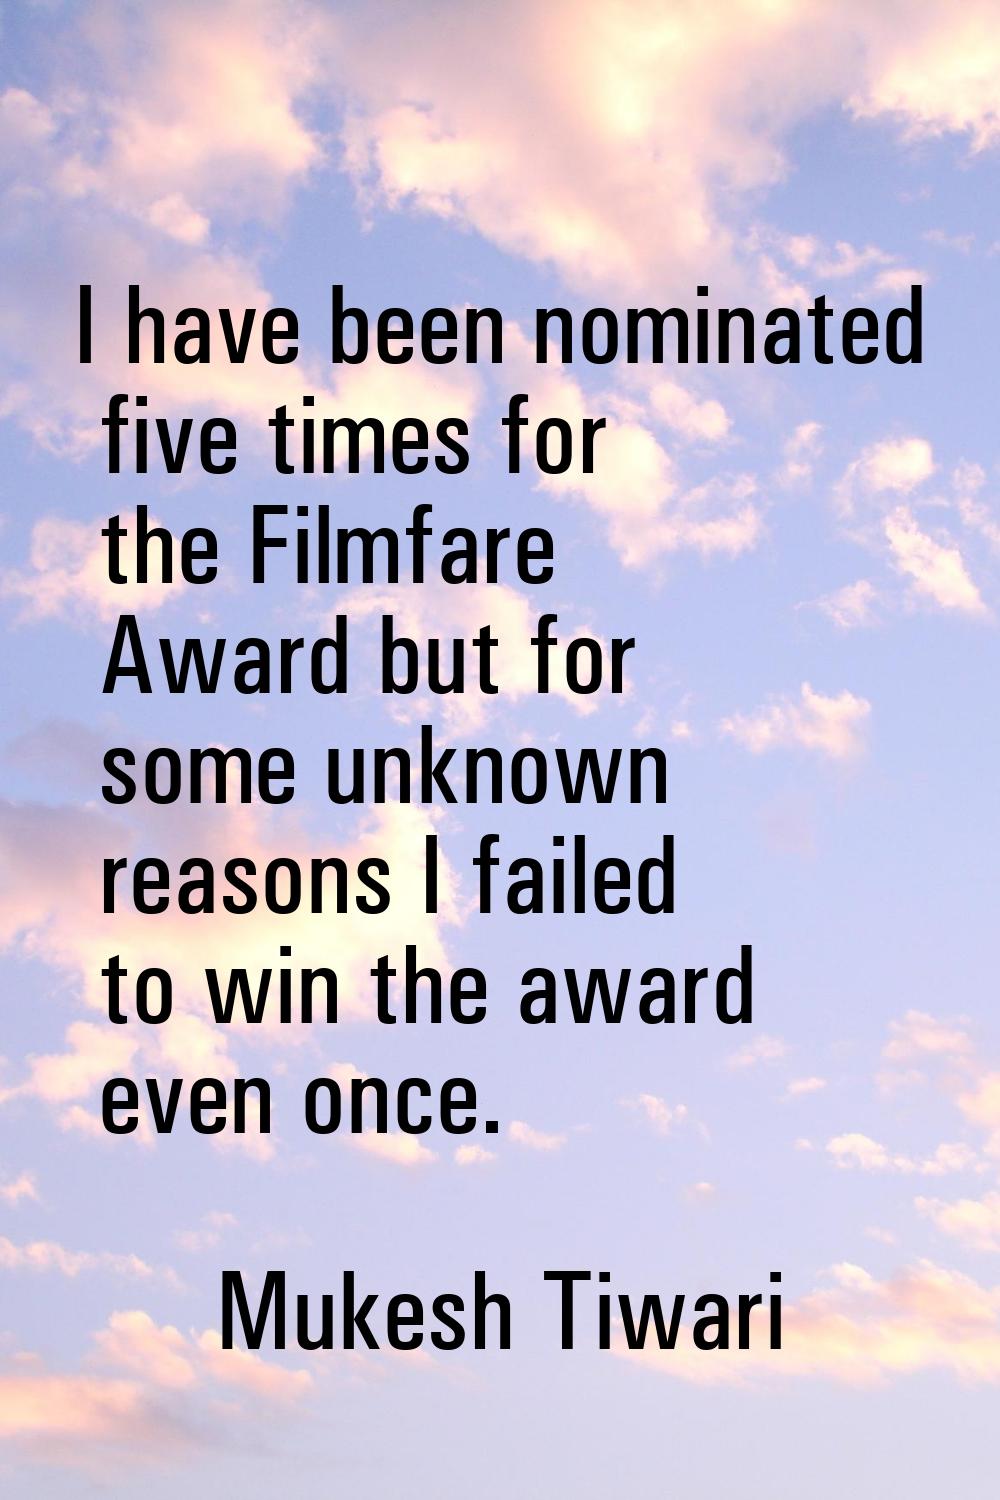 I have been nominated five times for the Filmfare Award but for some unknown reasons I failed to wi